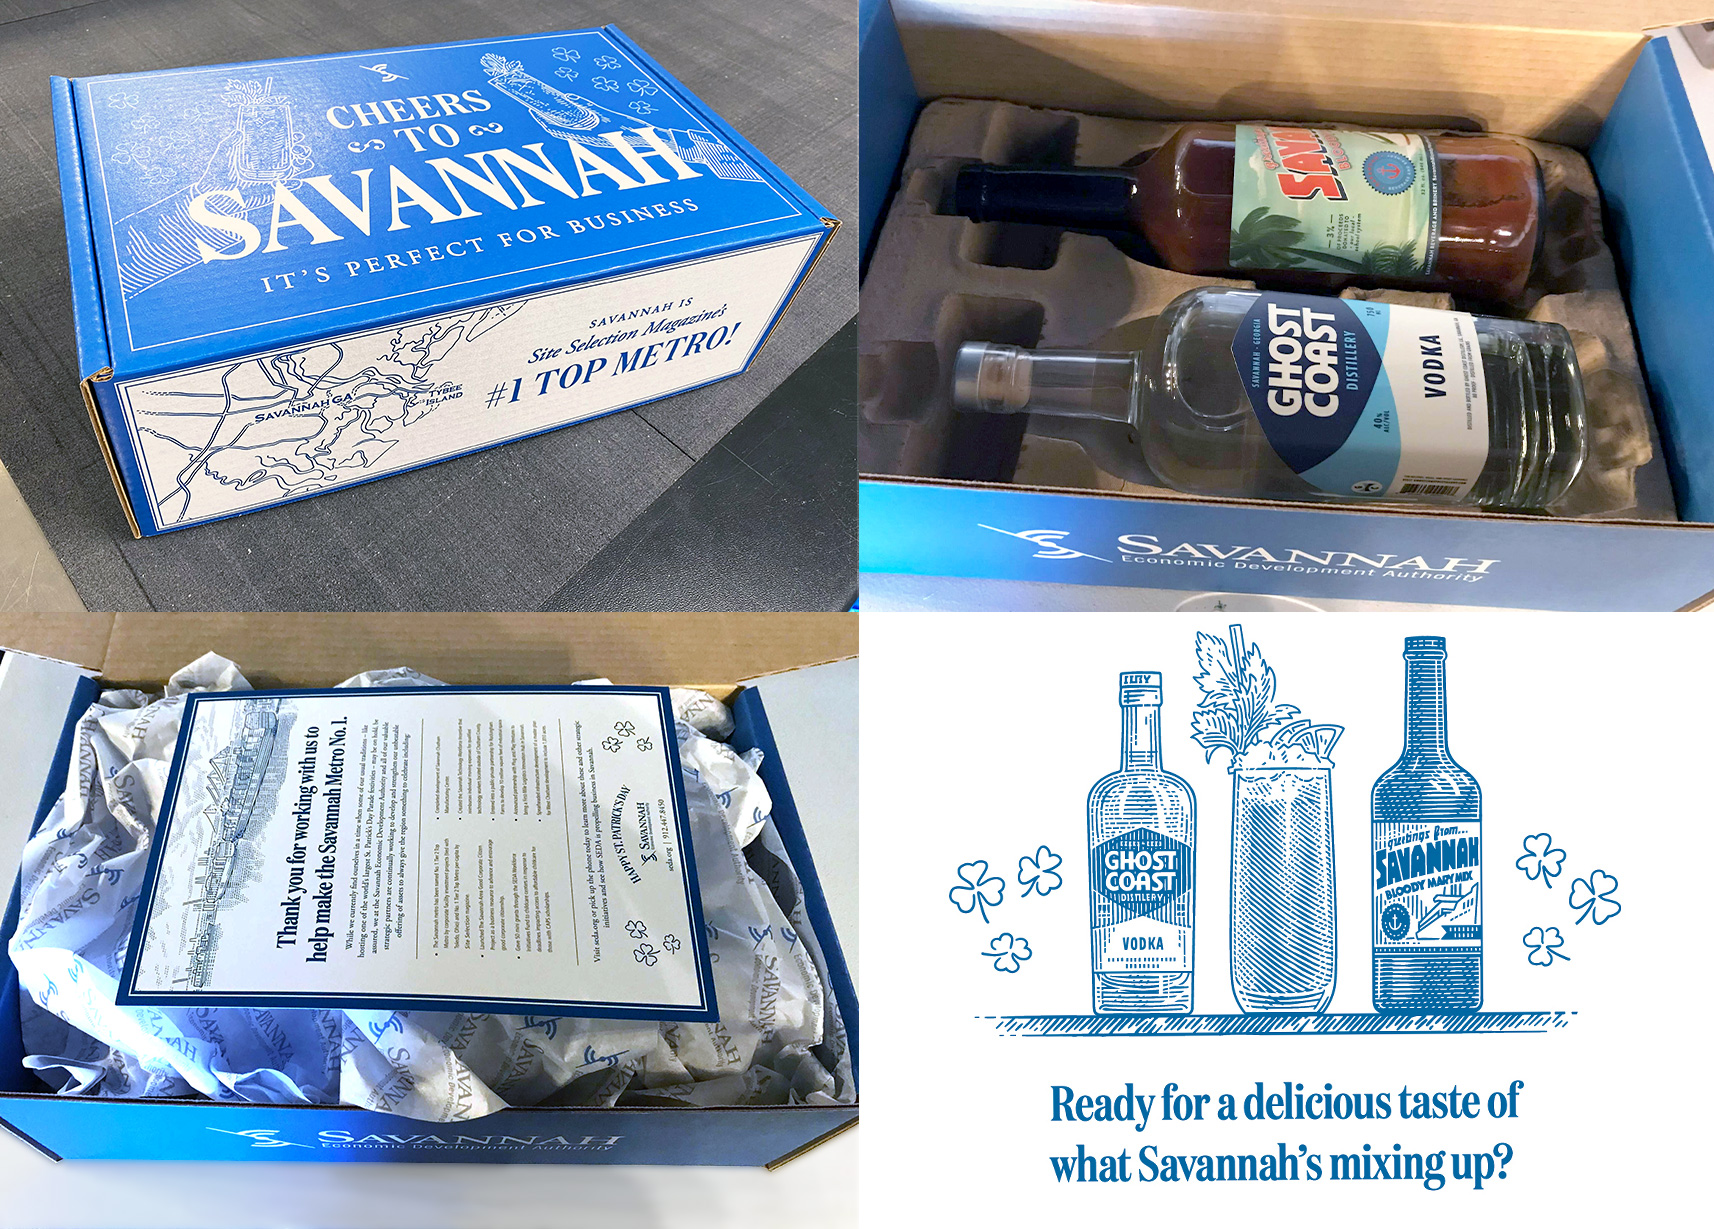 Packaged box with bottle of vodka and mixer inside